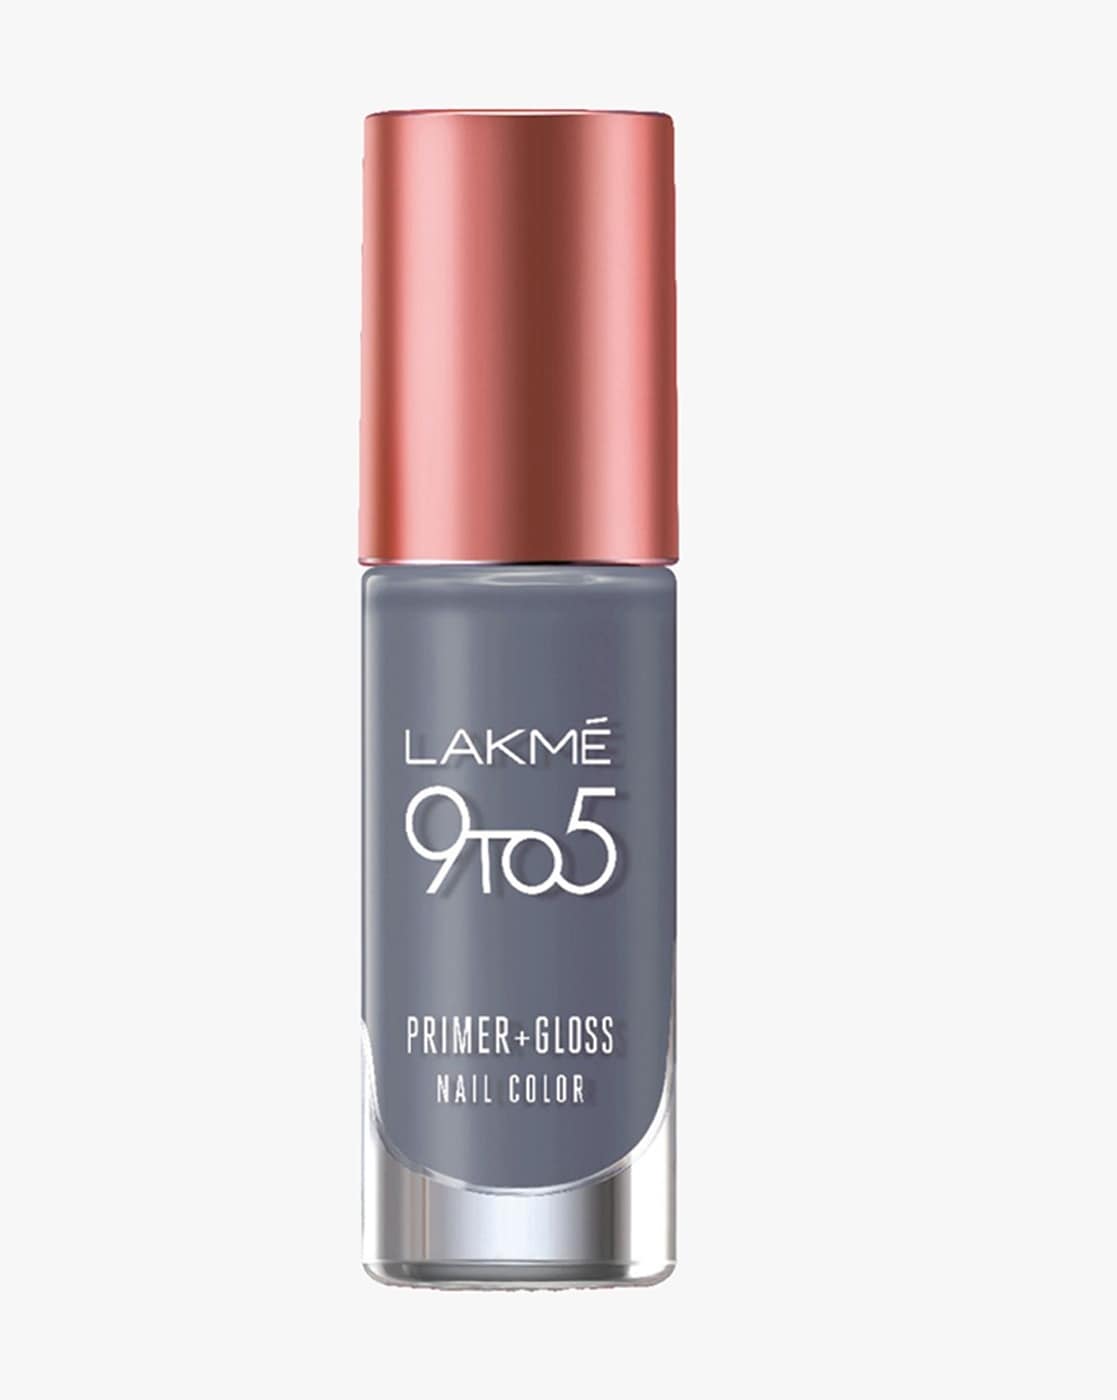 Buy Lakme Absolute Gel Stylist Nail Colour Online at Best Price of Rs 241.8  - bigbasket